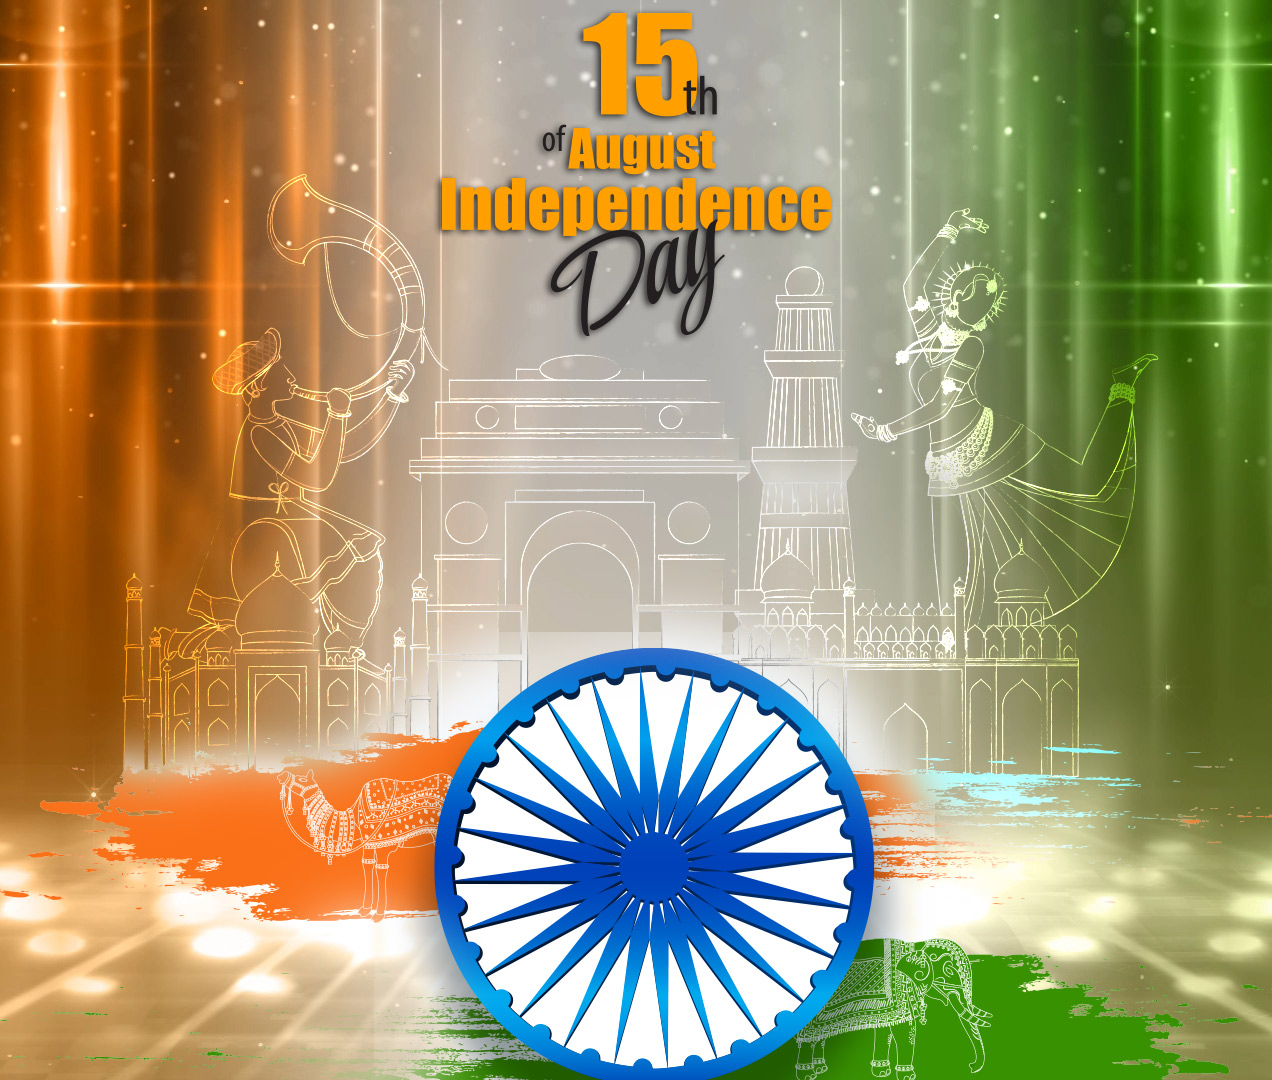 India independence day wishes, images, whatsapp status, greetings, HD wallpaper - 15 August